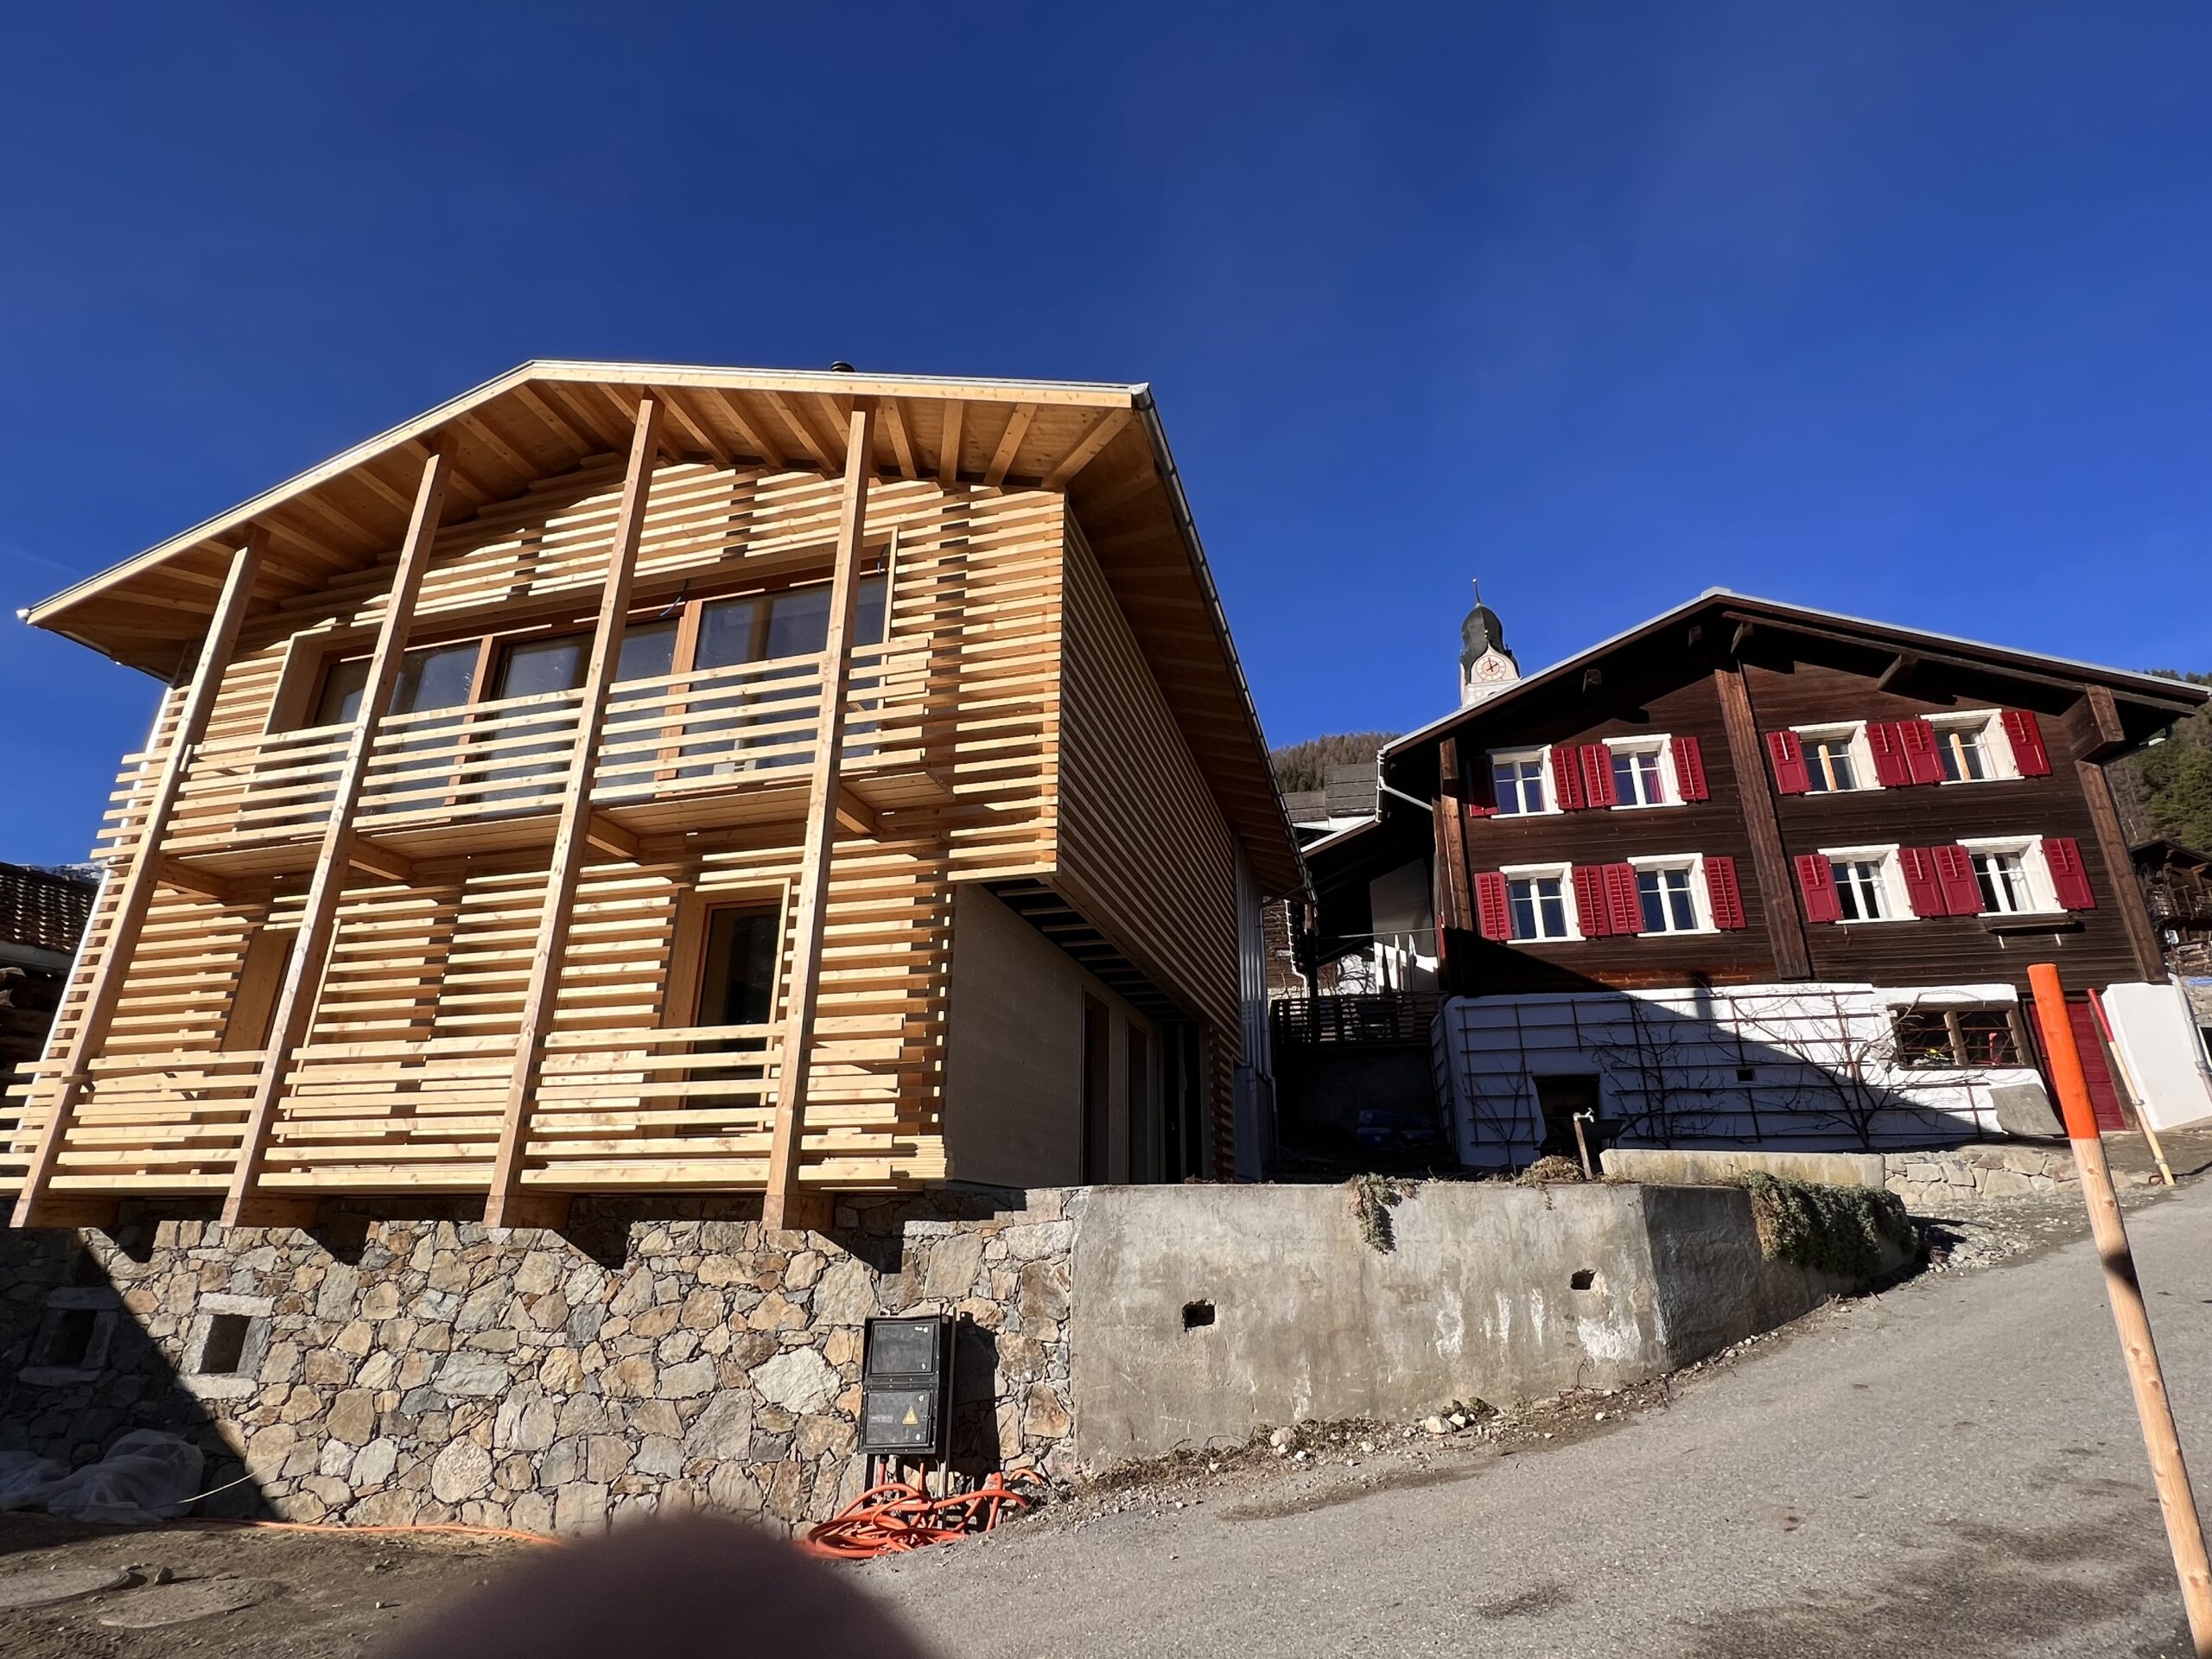 The new workshops room and the guest house of Sonnennest in Sumvitg, Graubünden, CH.